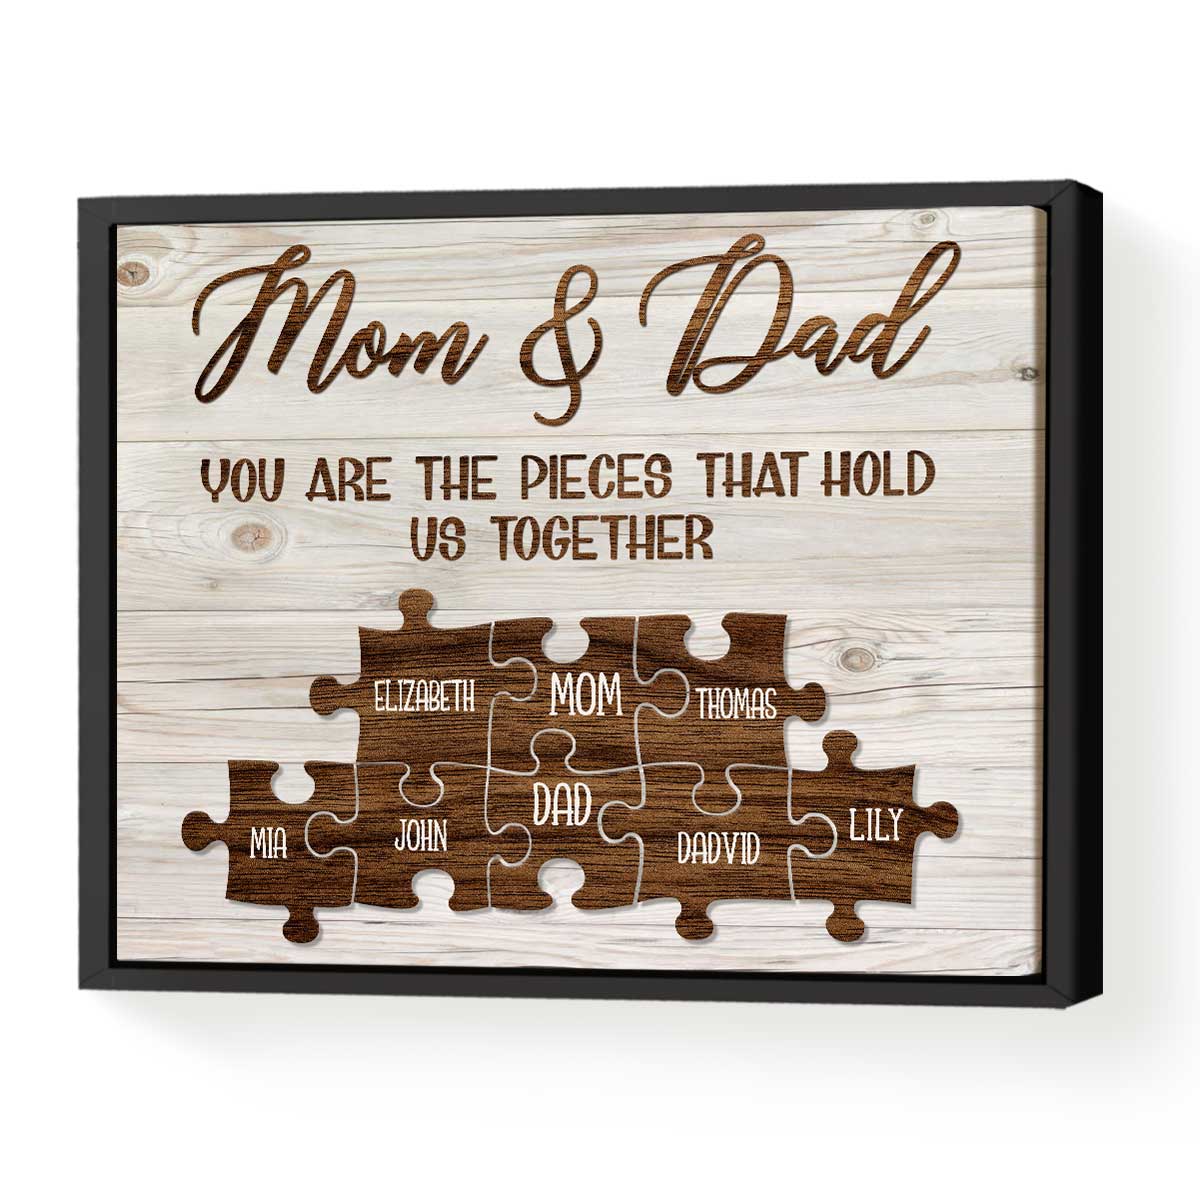 Mum dad mothers day photo frame fathers gift Vector Image